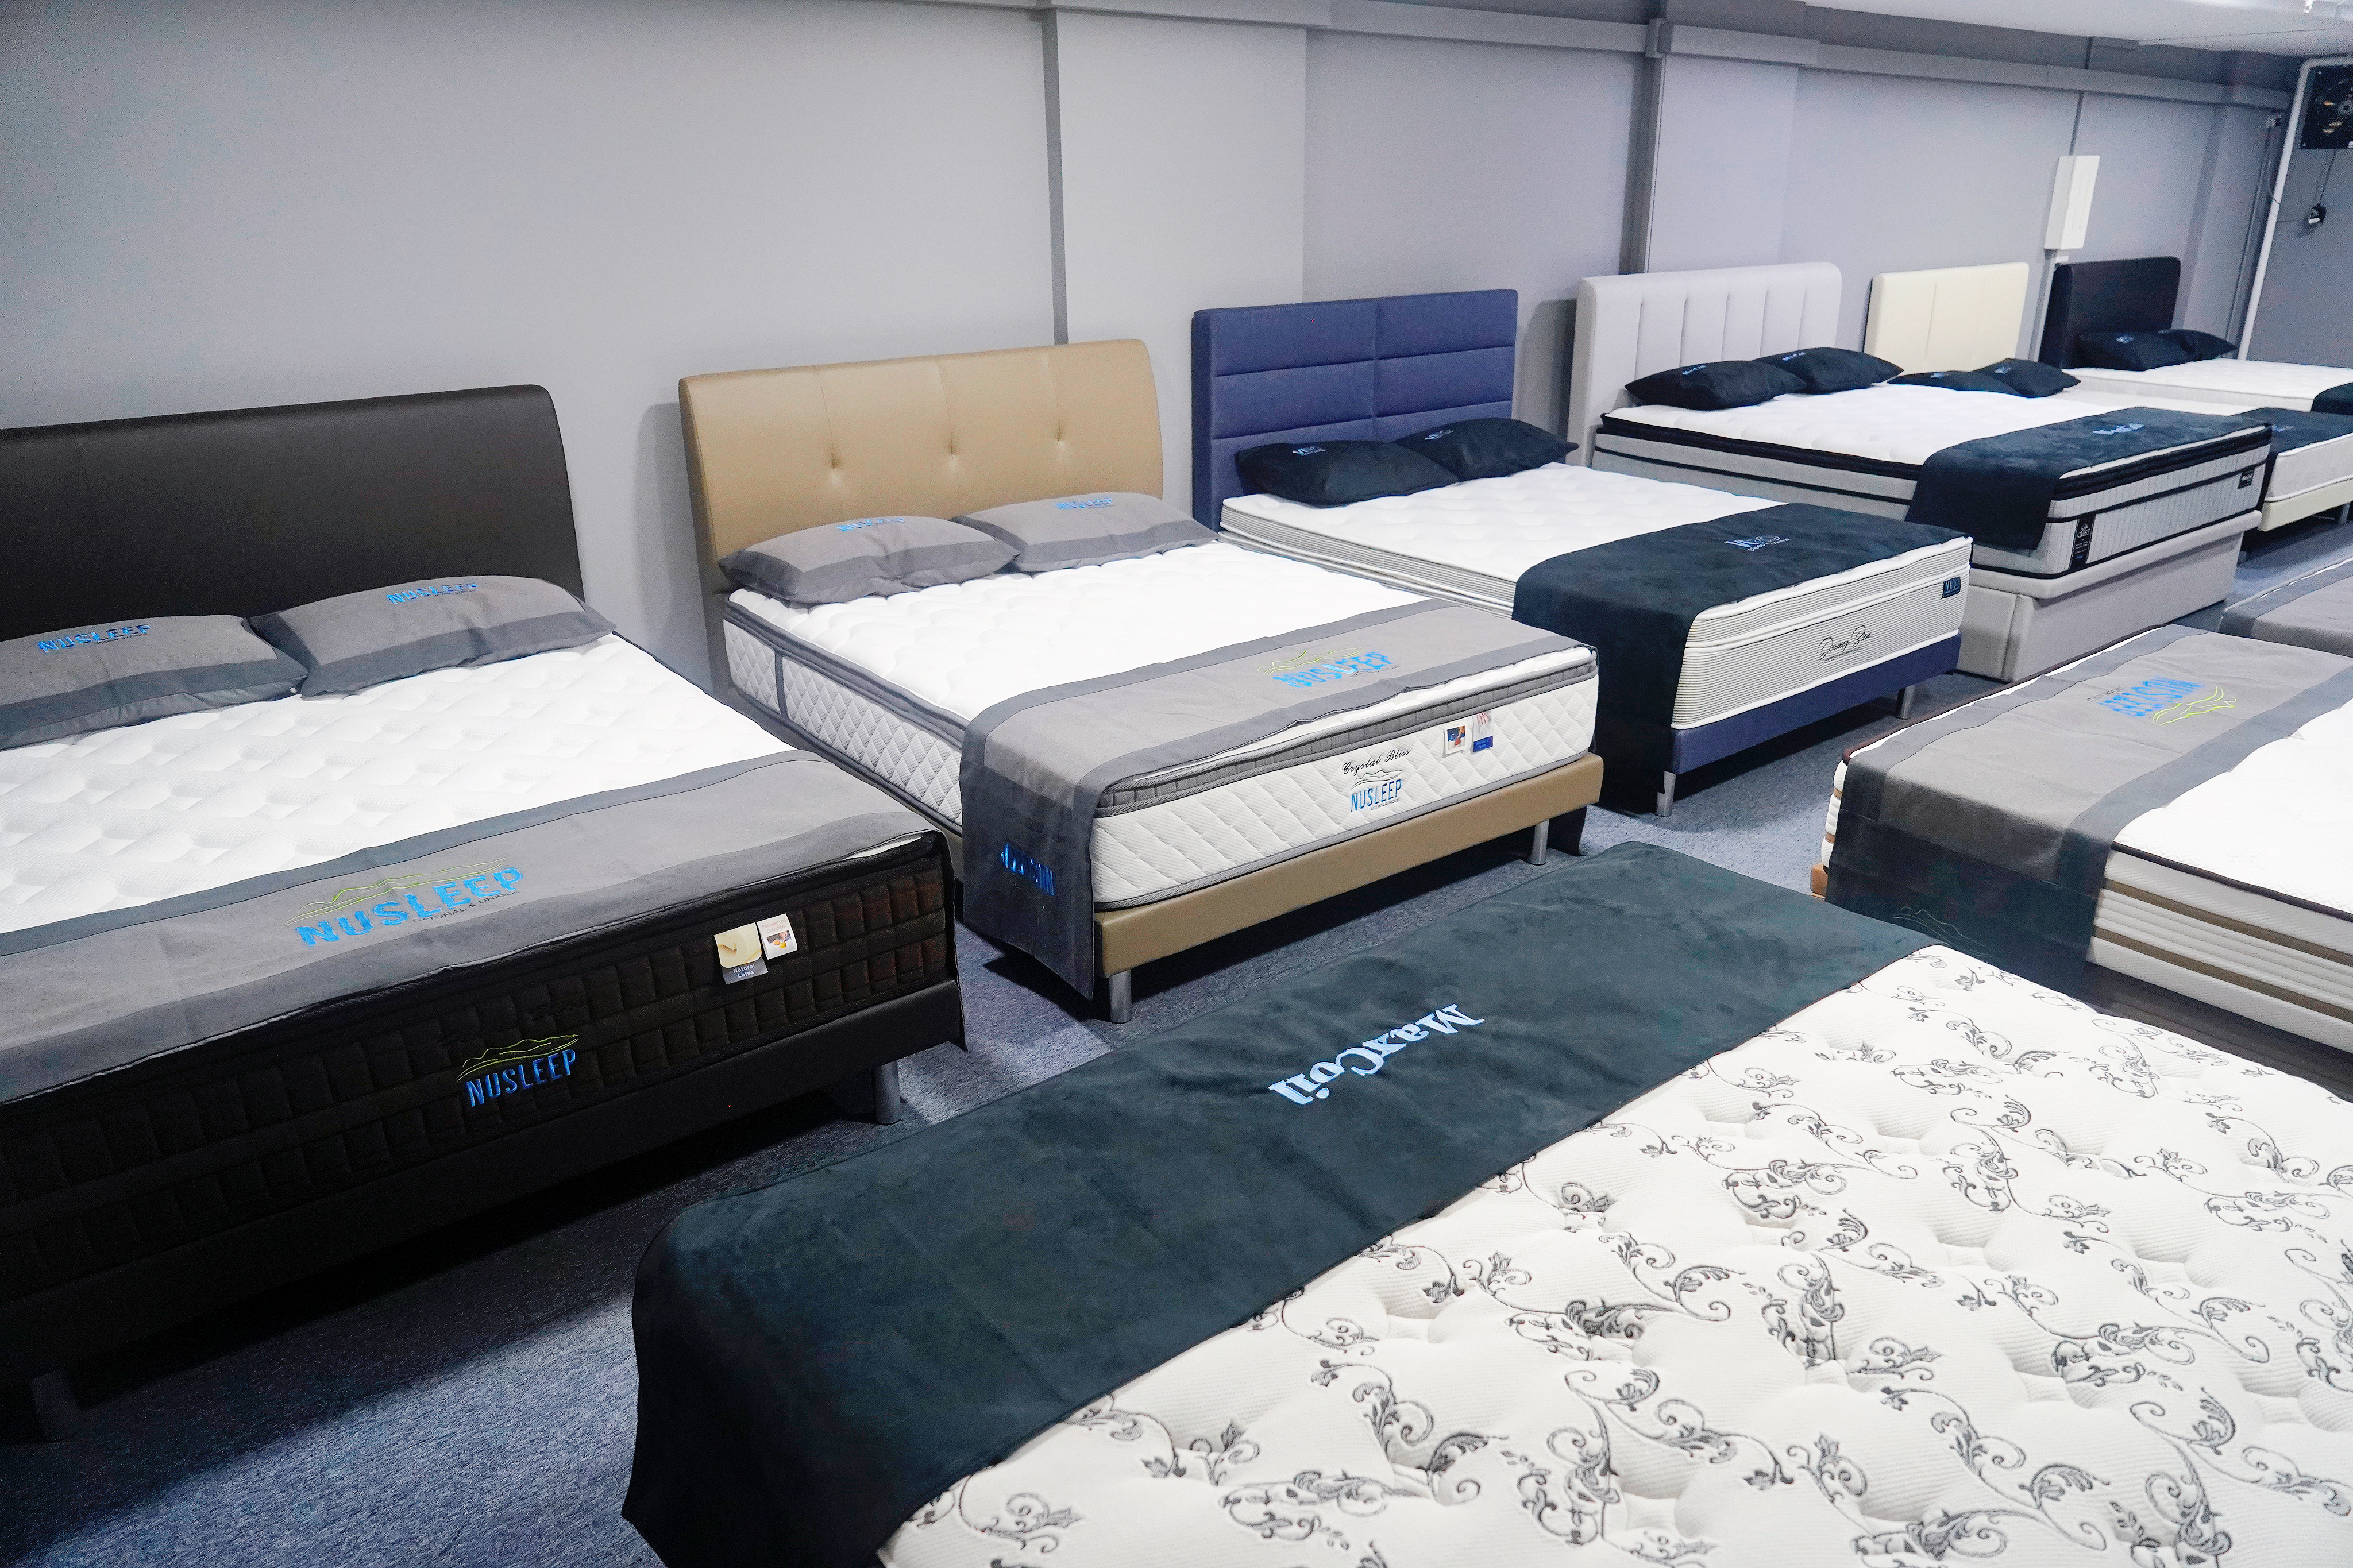 Lobang: Up to 70% off mattresses at Mattress Store in Chai Chee from 23 Jun - 3 July 2022; Queen-sized mattress from S$399 - 5